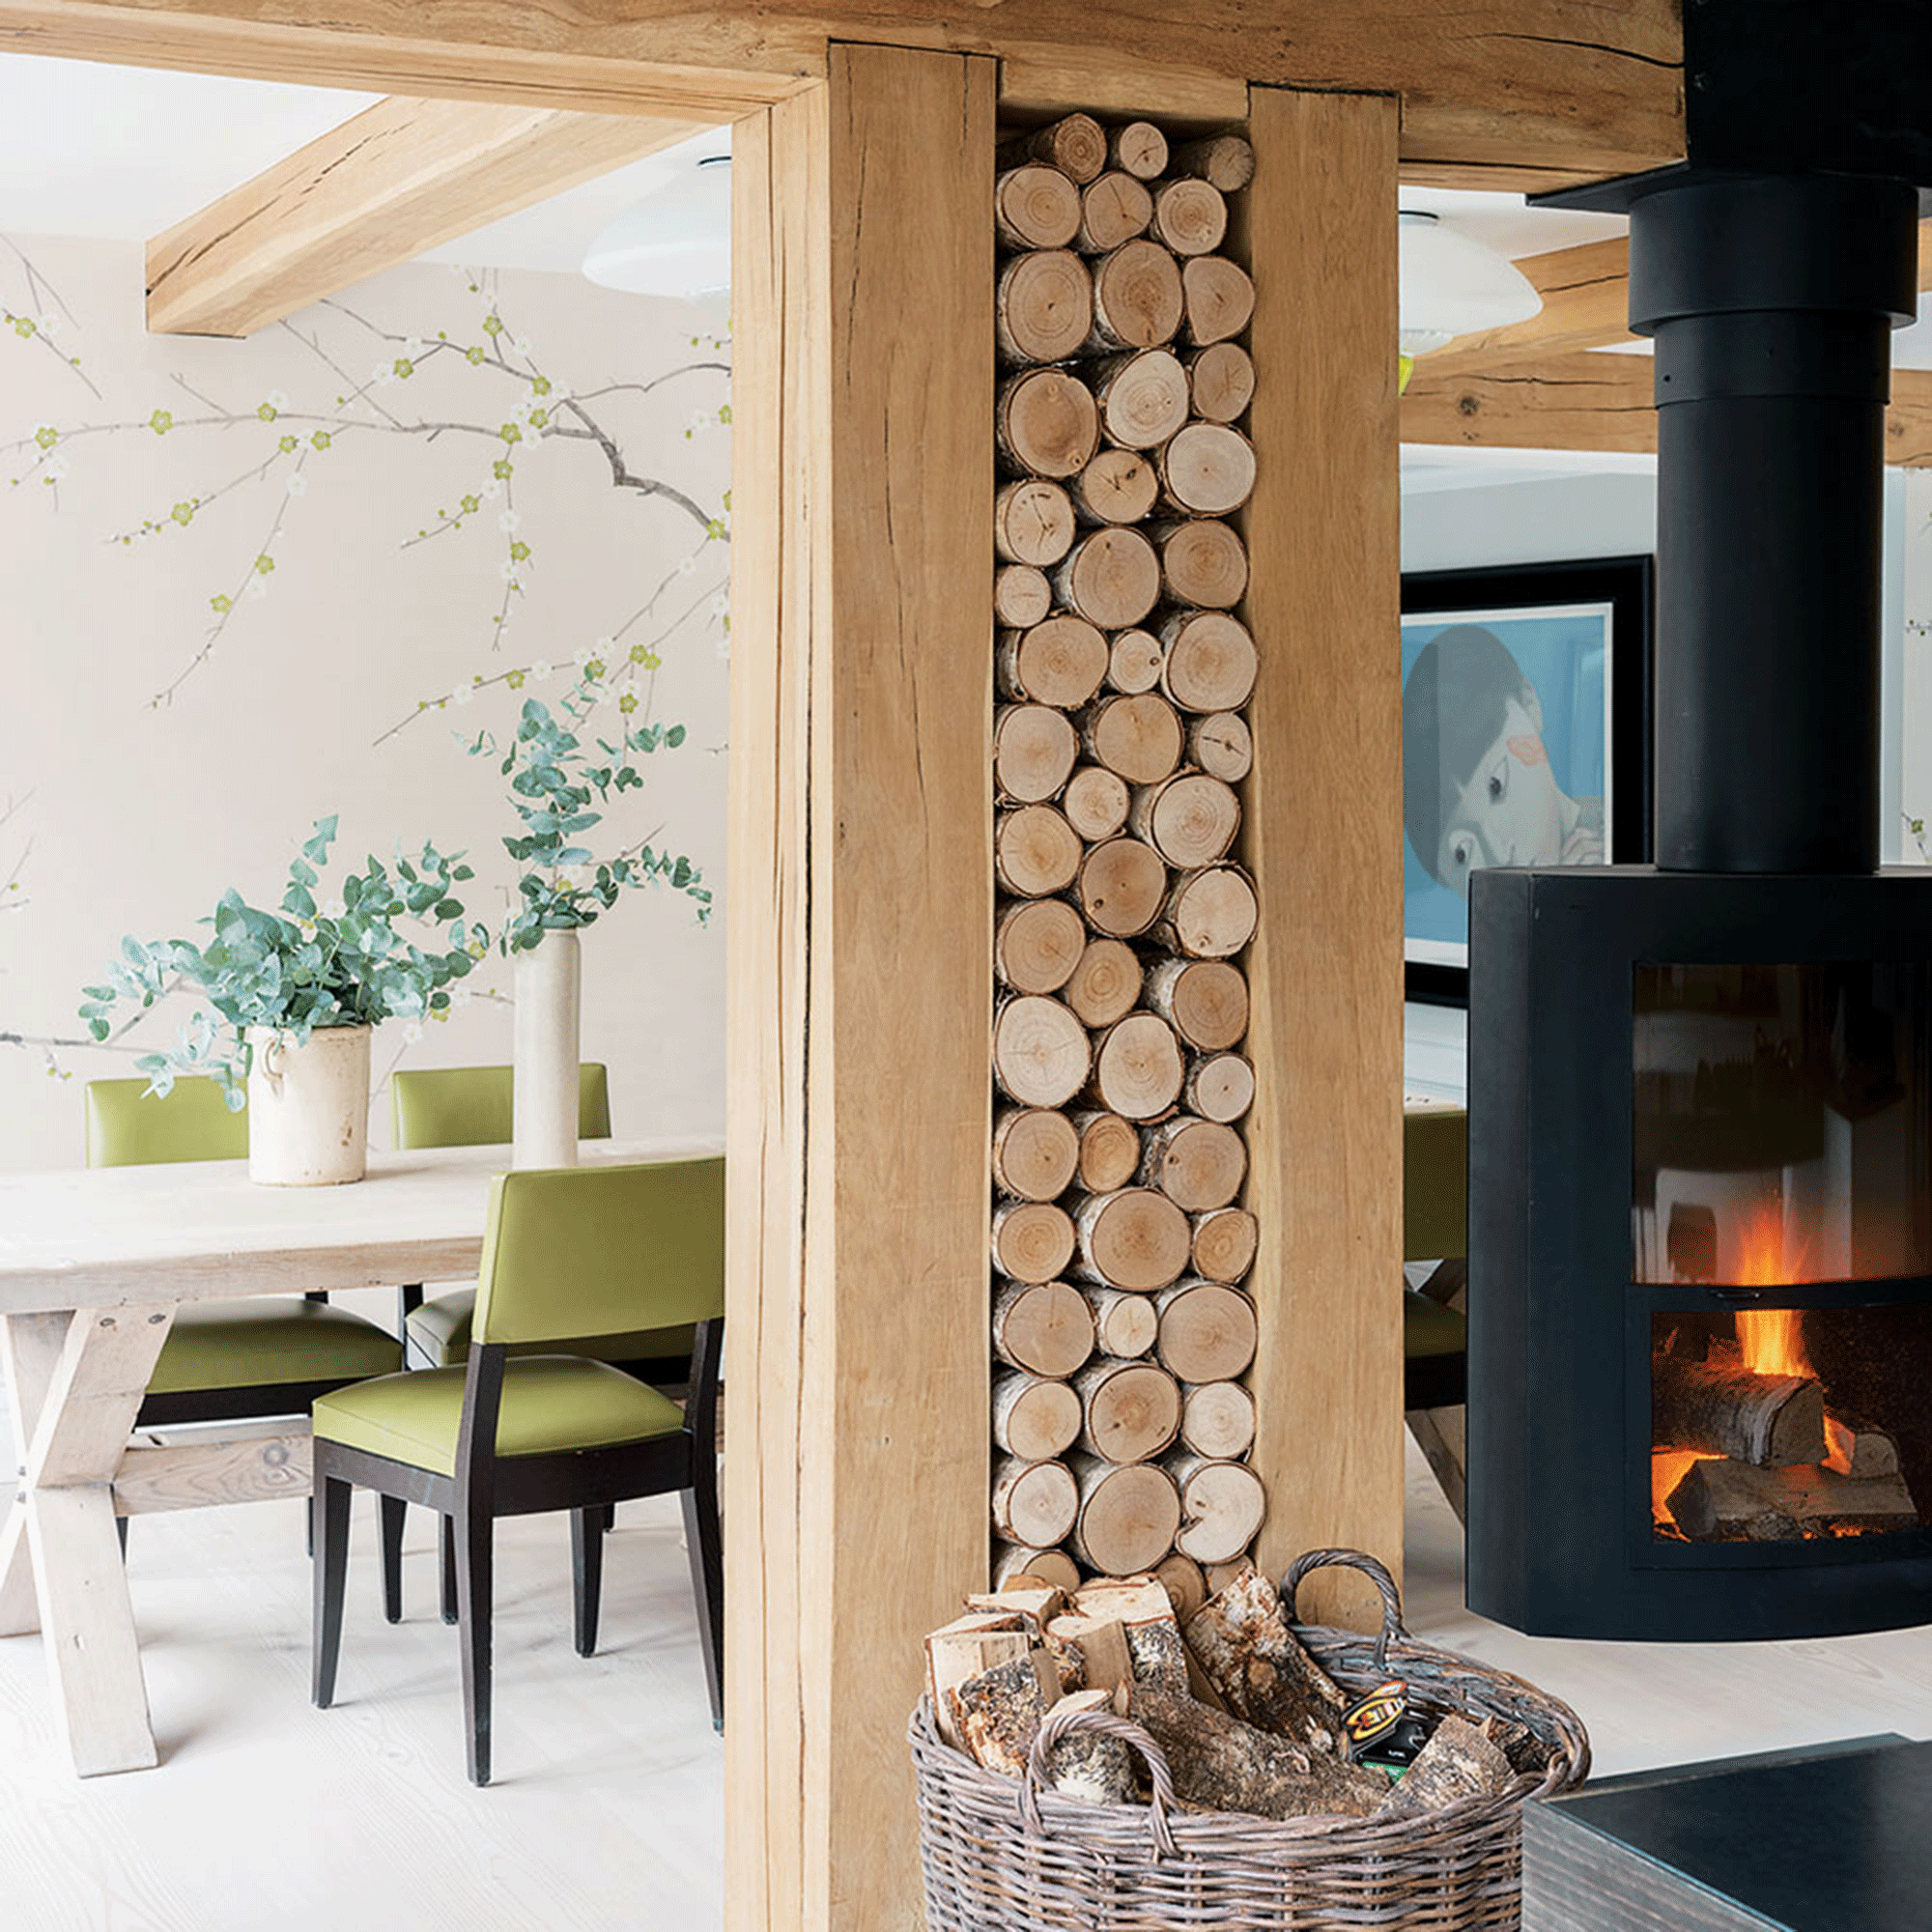 Wooden beams with log storage next to stove